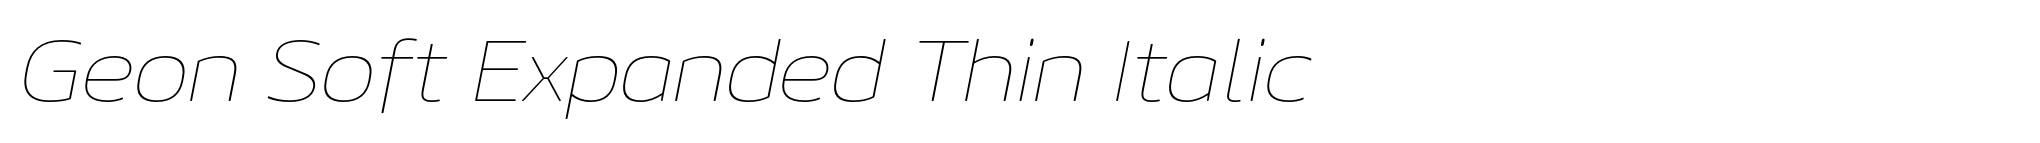 Geon Soft Expanded Thin Italic image